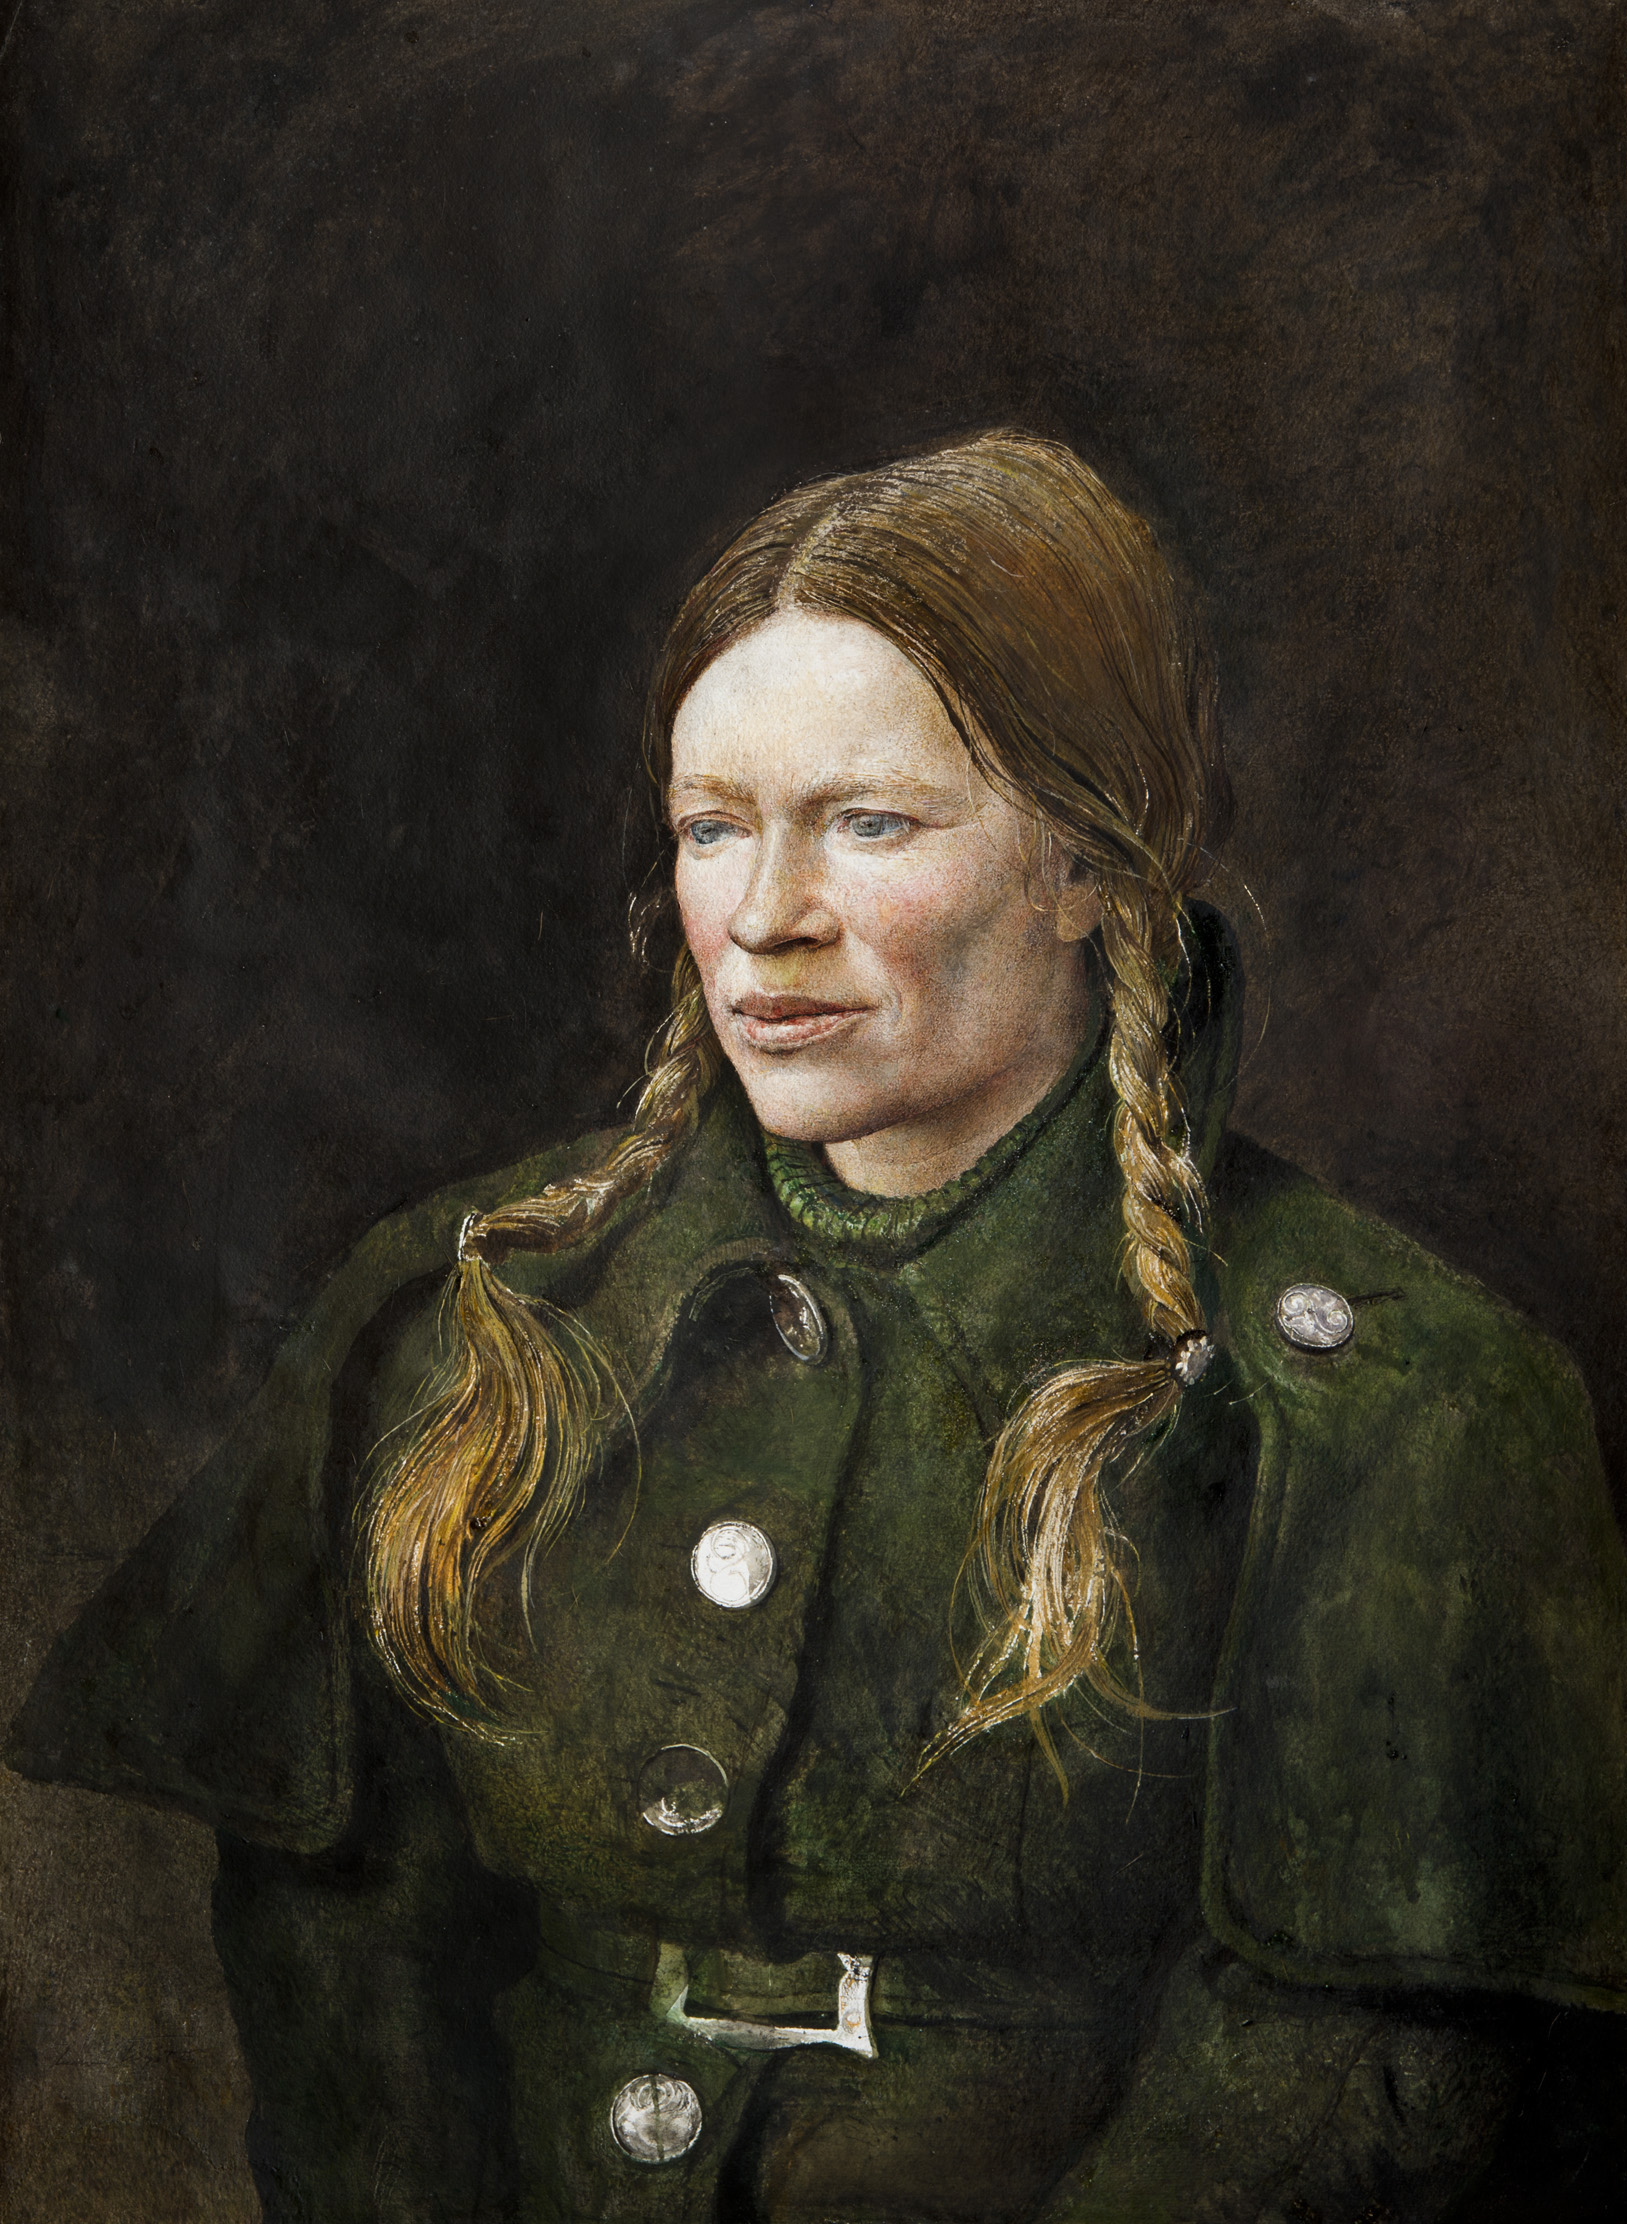 This is a portrait of Helga, Wyeths neighbor and lover. The paintings depicts a sole figure, Helga, with two braids in her hair and a 3 quarter view. She is not looking straight at the viewer but is positioned at a 3/4 view towards the left. The image is peaceful and evokes feelings of winter as she is donning a green wool jacket with gold buttons.